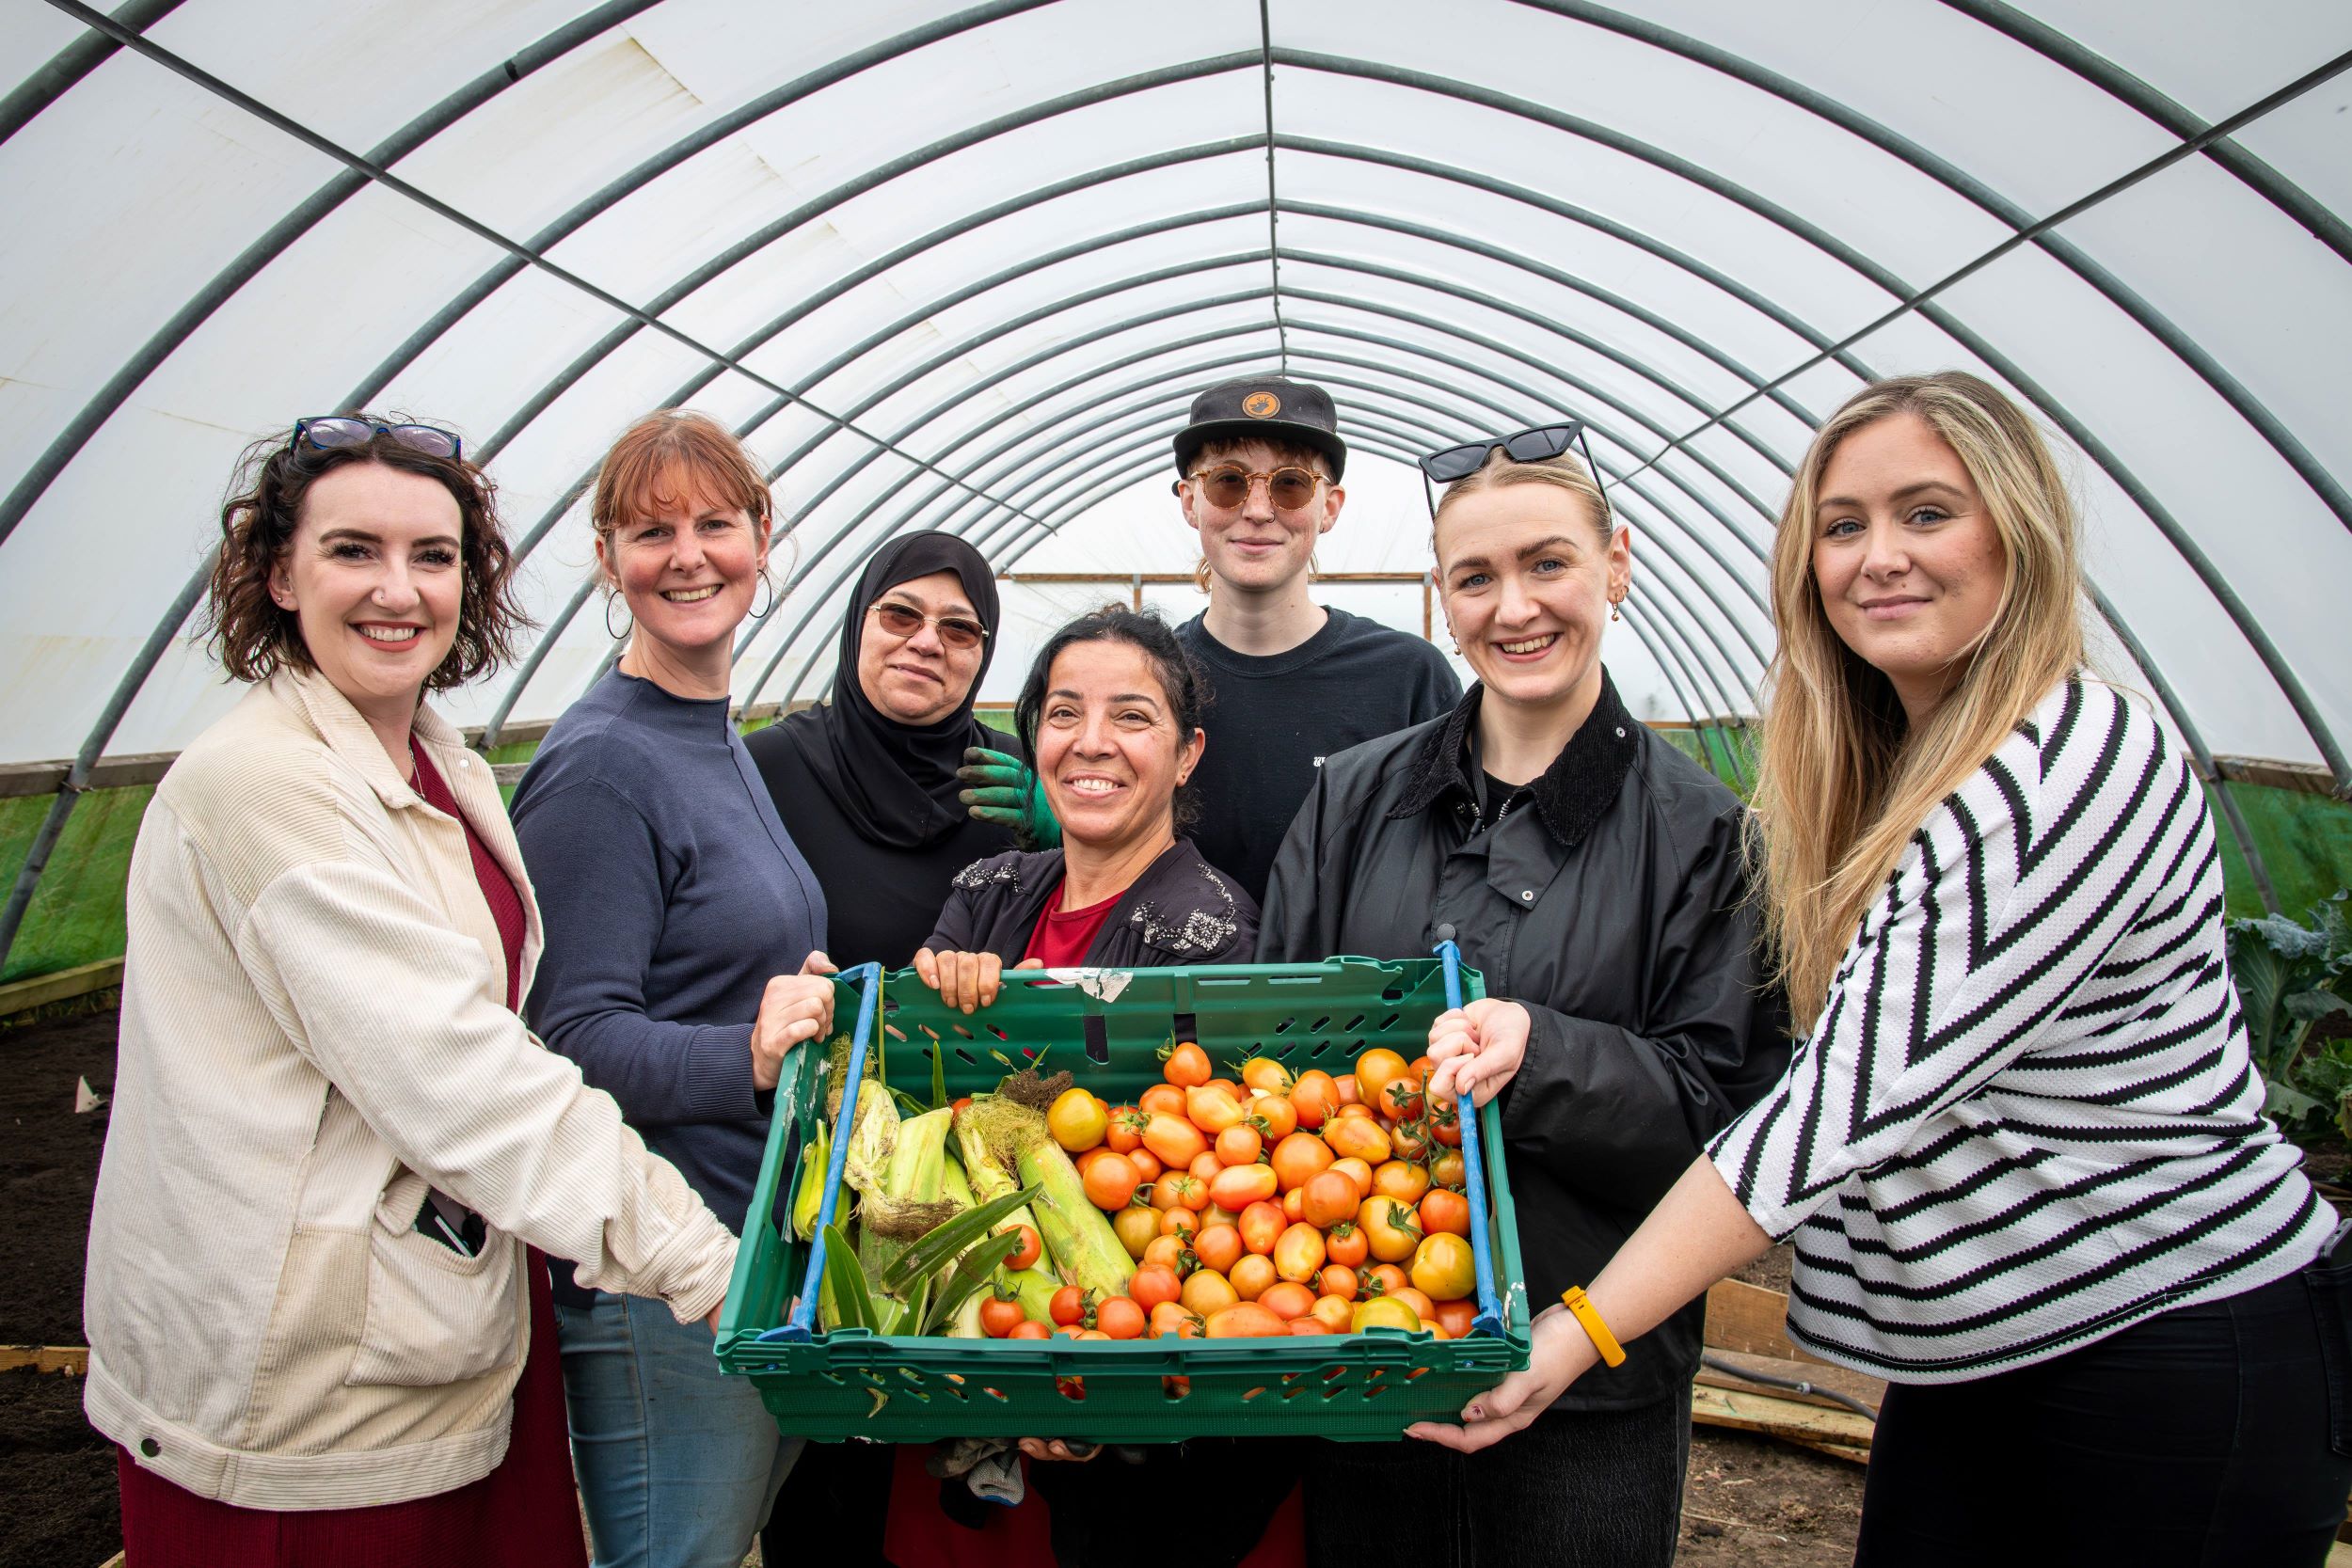 Kate Myers of Newcastle Building Society, WEWGC farm development manager Jill Heslop, project member Iqbal, WEWGC community gardener Shireen Abdullah, project volunteer Jen, Alice Millican of Newcastle Building Society and Charlotte Norrie of Newcastle Strategic Solutions